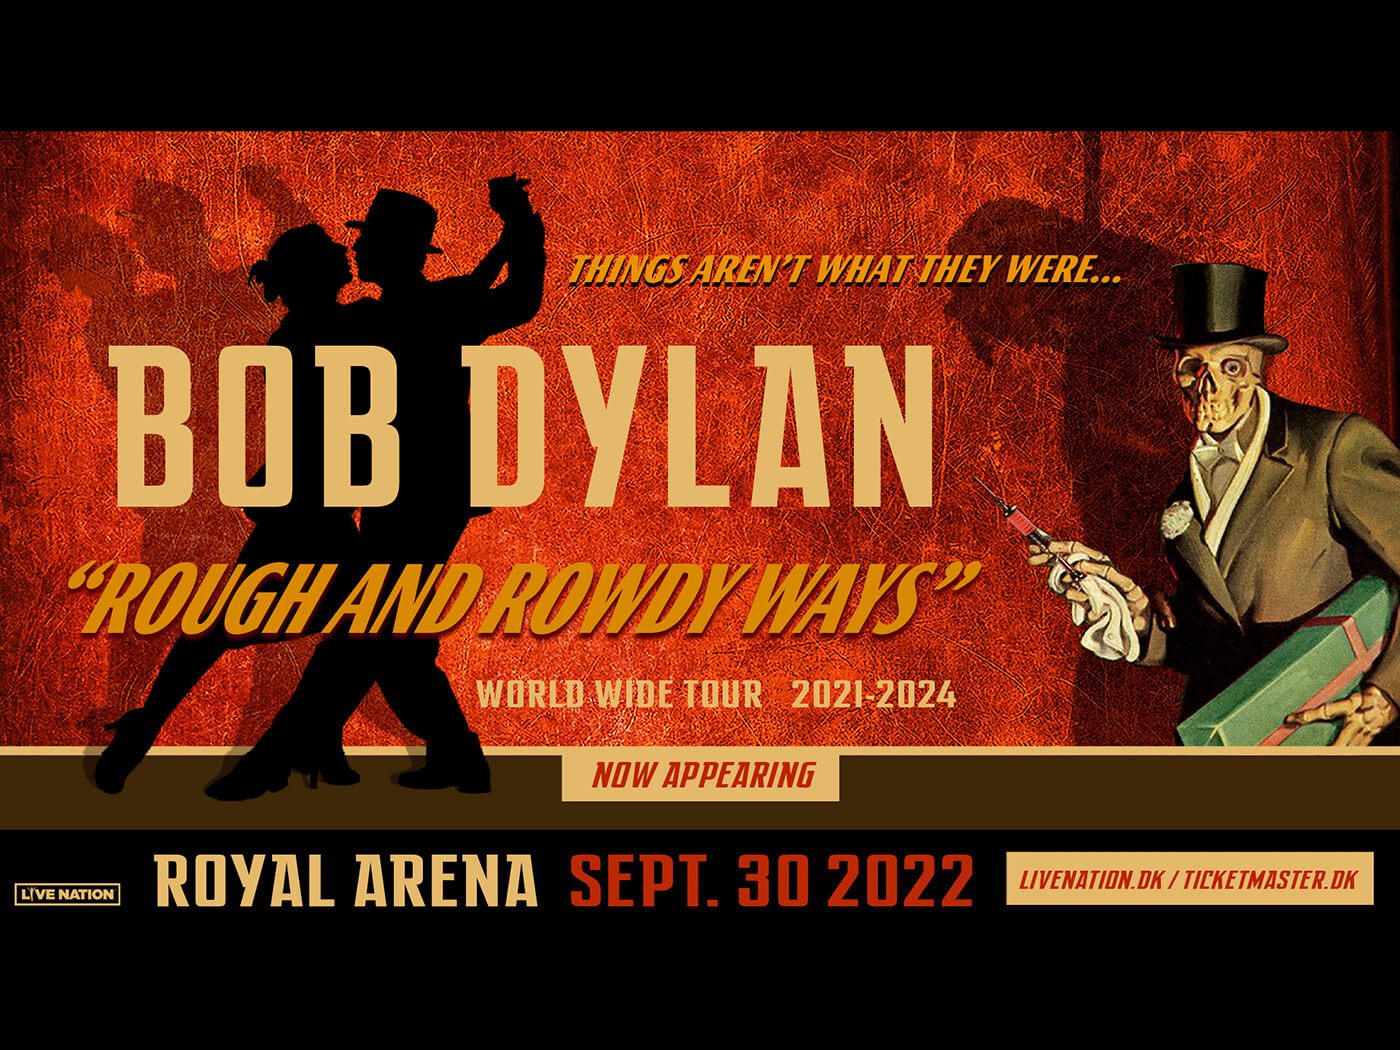 Bob Dylan’s Rough And Rowdy Ways Tour continues! Show 4: Copenhagen